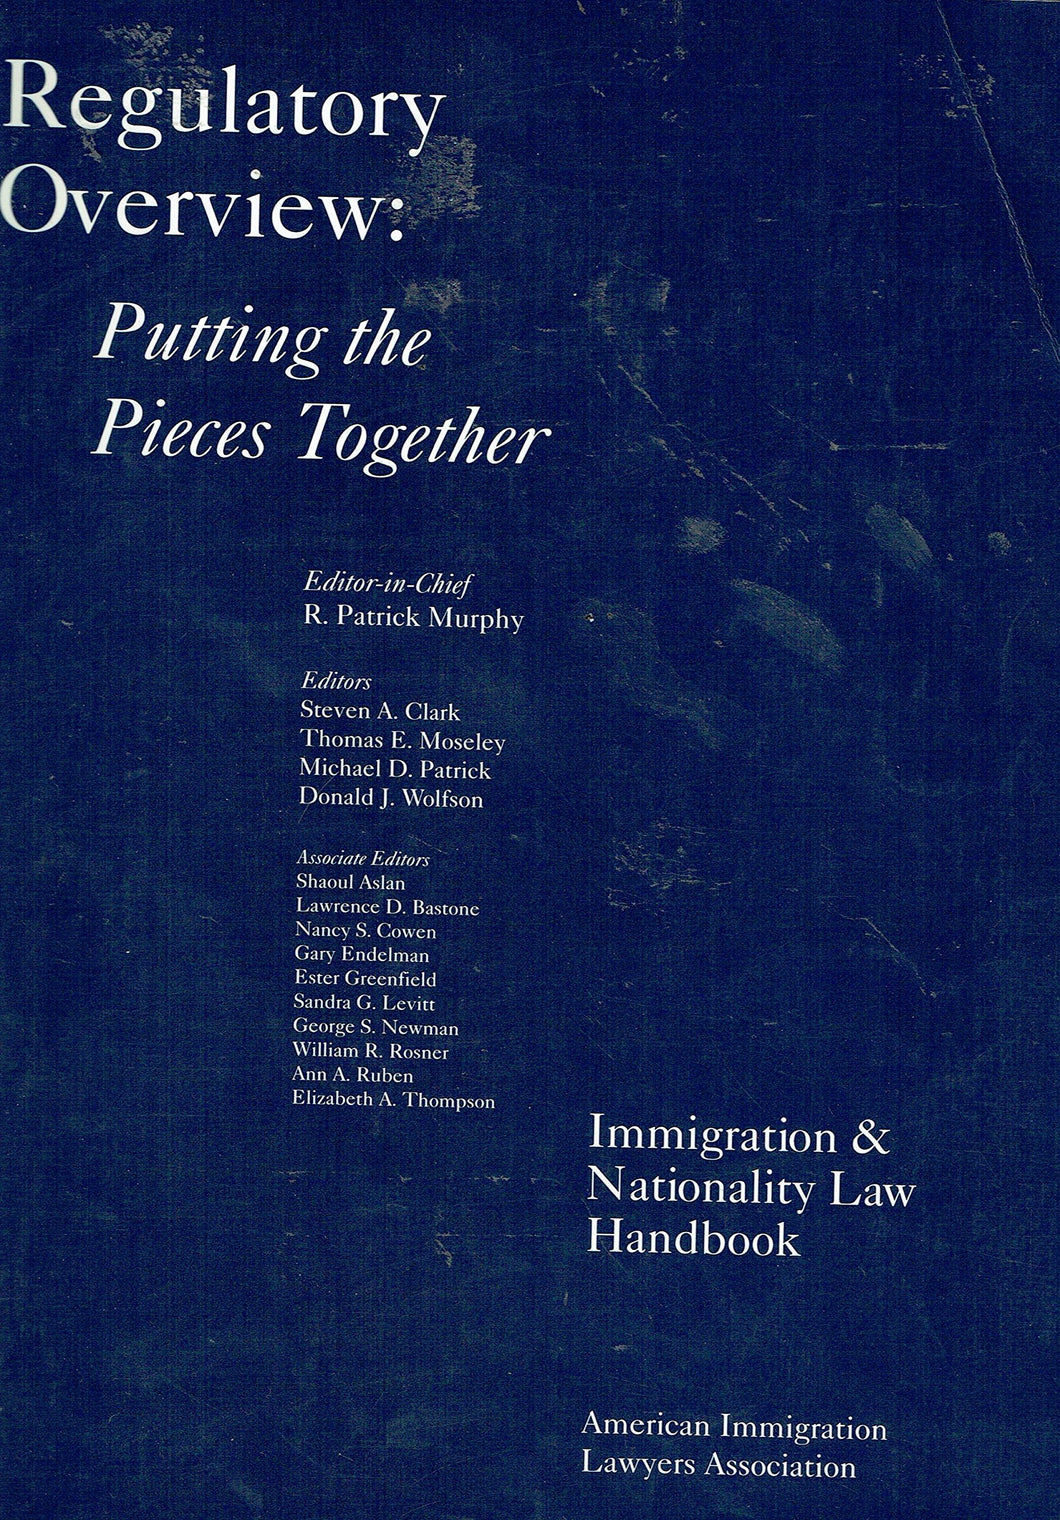 Immigration and Nationality Law Handbook 1993-94 Y Overview 1993-1994